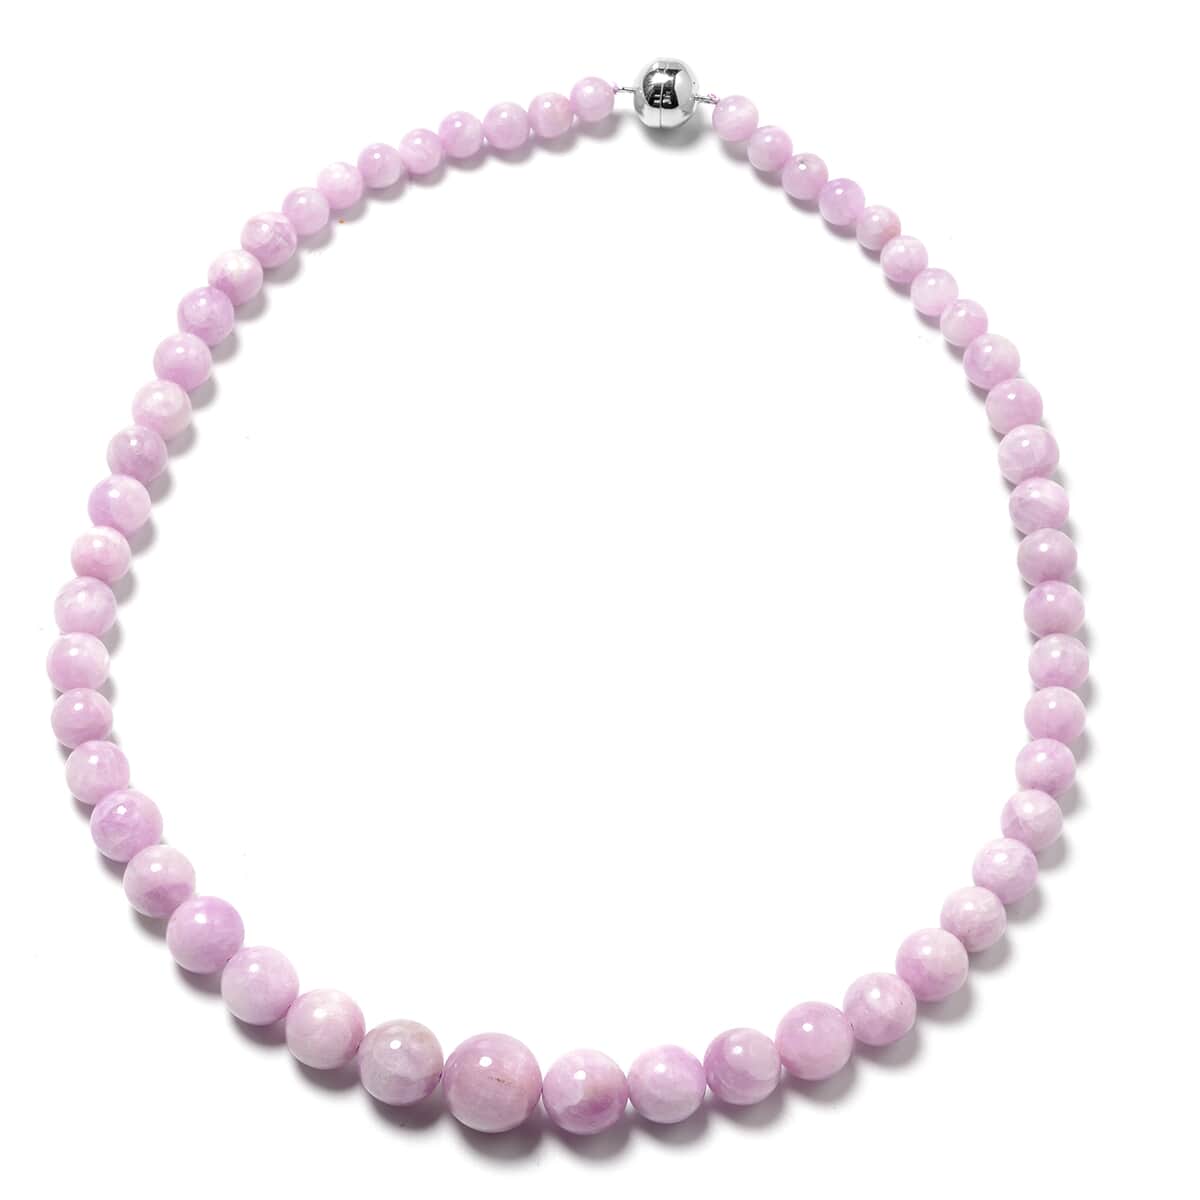 Martha Rocha Kunzite Bead Necklace in Sterling Silver, Silver Magnetic Clasp, Kunzite Necklace, Beaded Necklace 396.50 ctw 7-16mm (20 Inches) image number 0